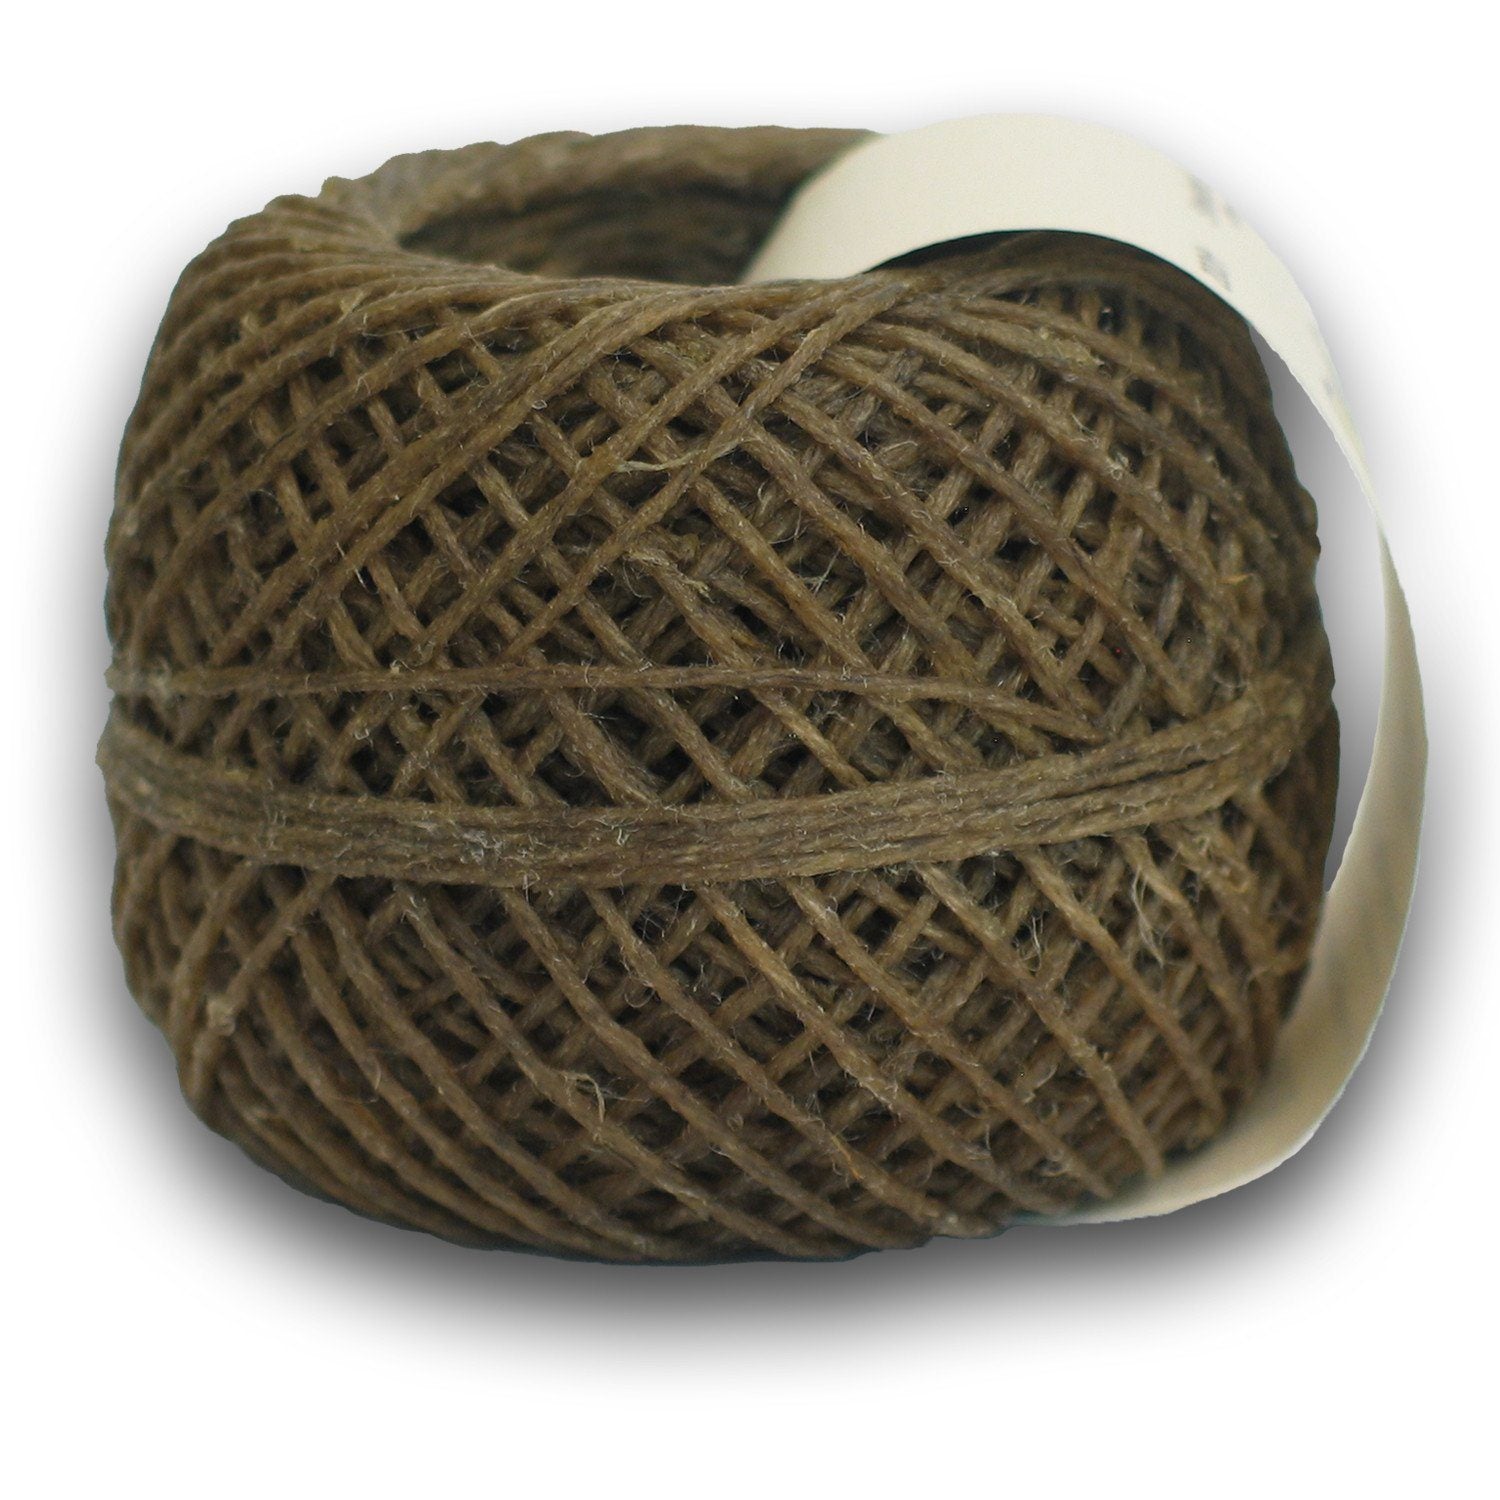 100% Organic Hemp Wick with Natural Beeswax Coating, Twisted Bee (200ft x Standard Size)